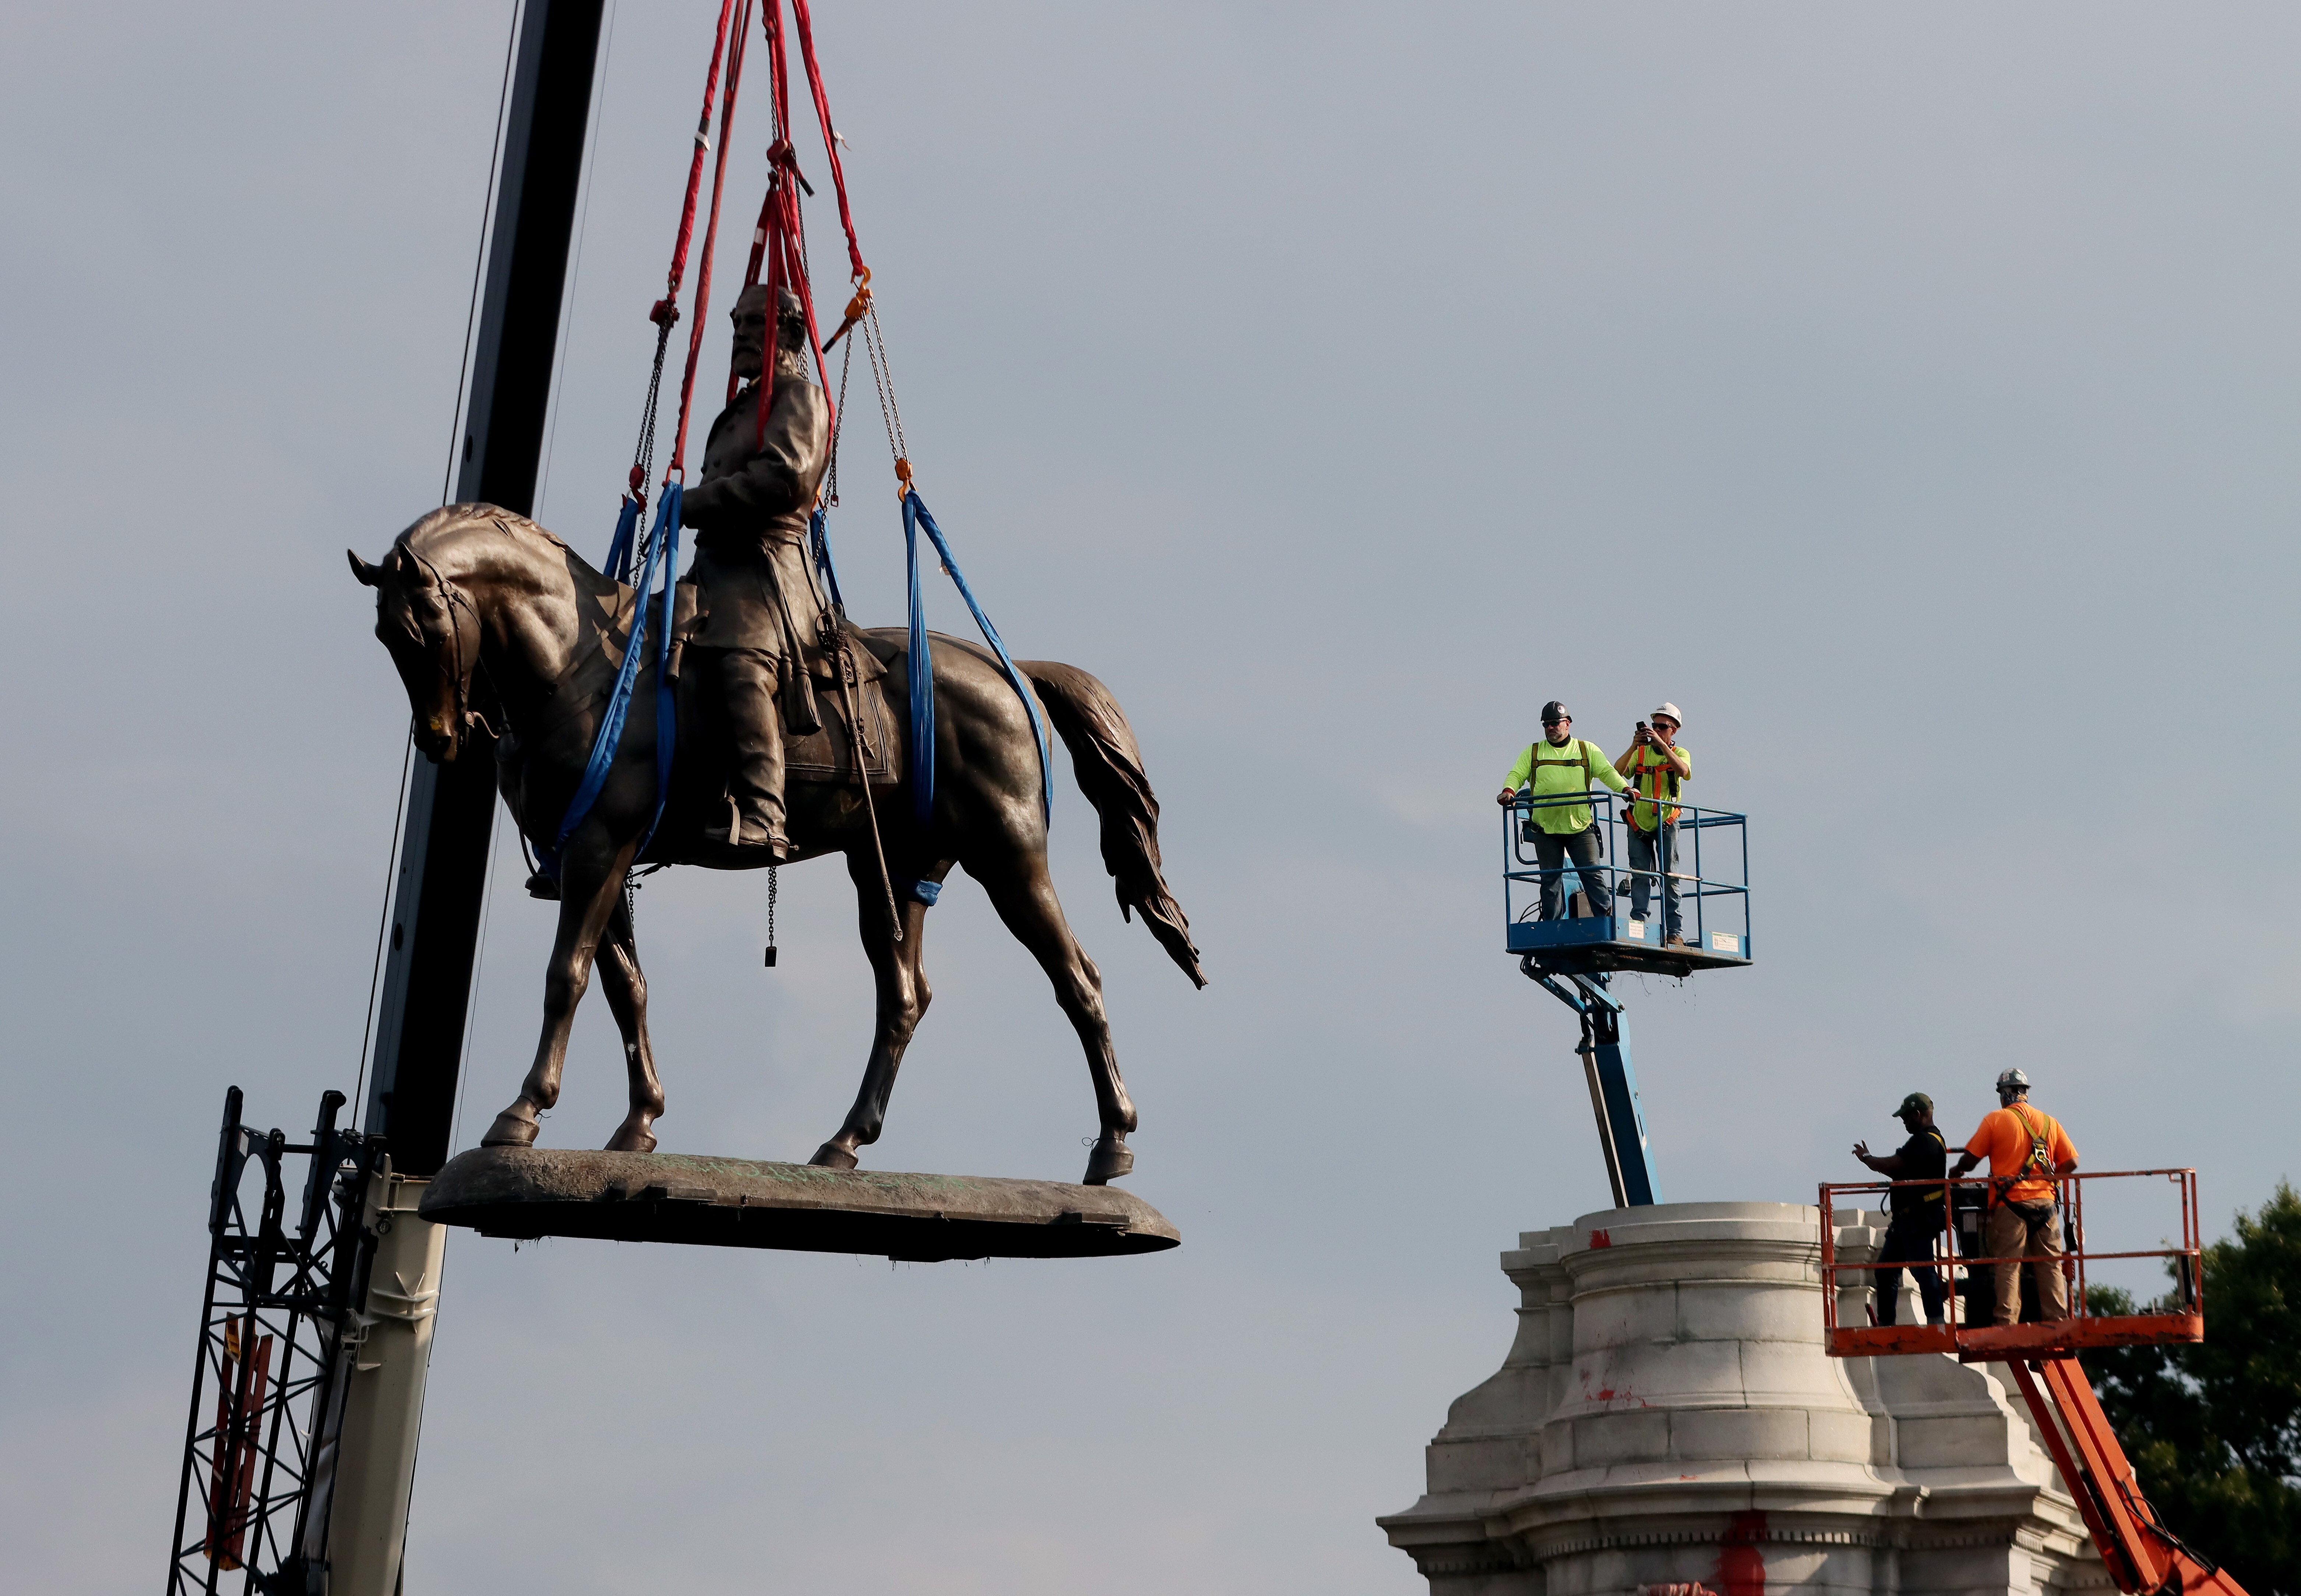 Workers take down the statue of Confederate General Robert E. Lee from its pedestal on Monument Avenue in Richmond, Virginia. Photo: DPA